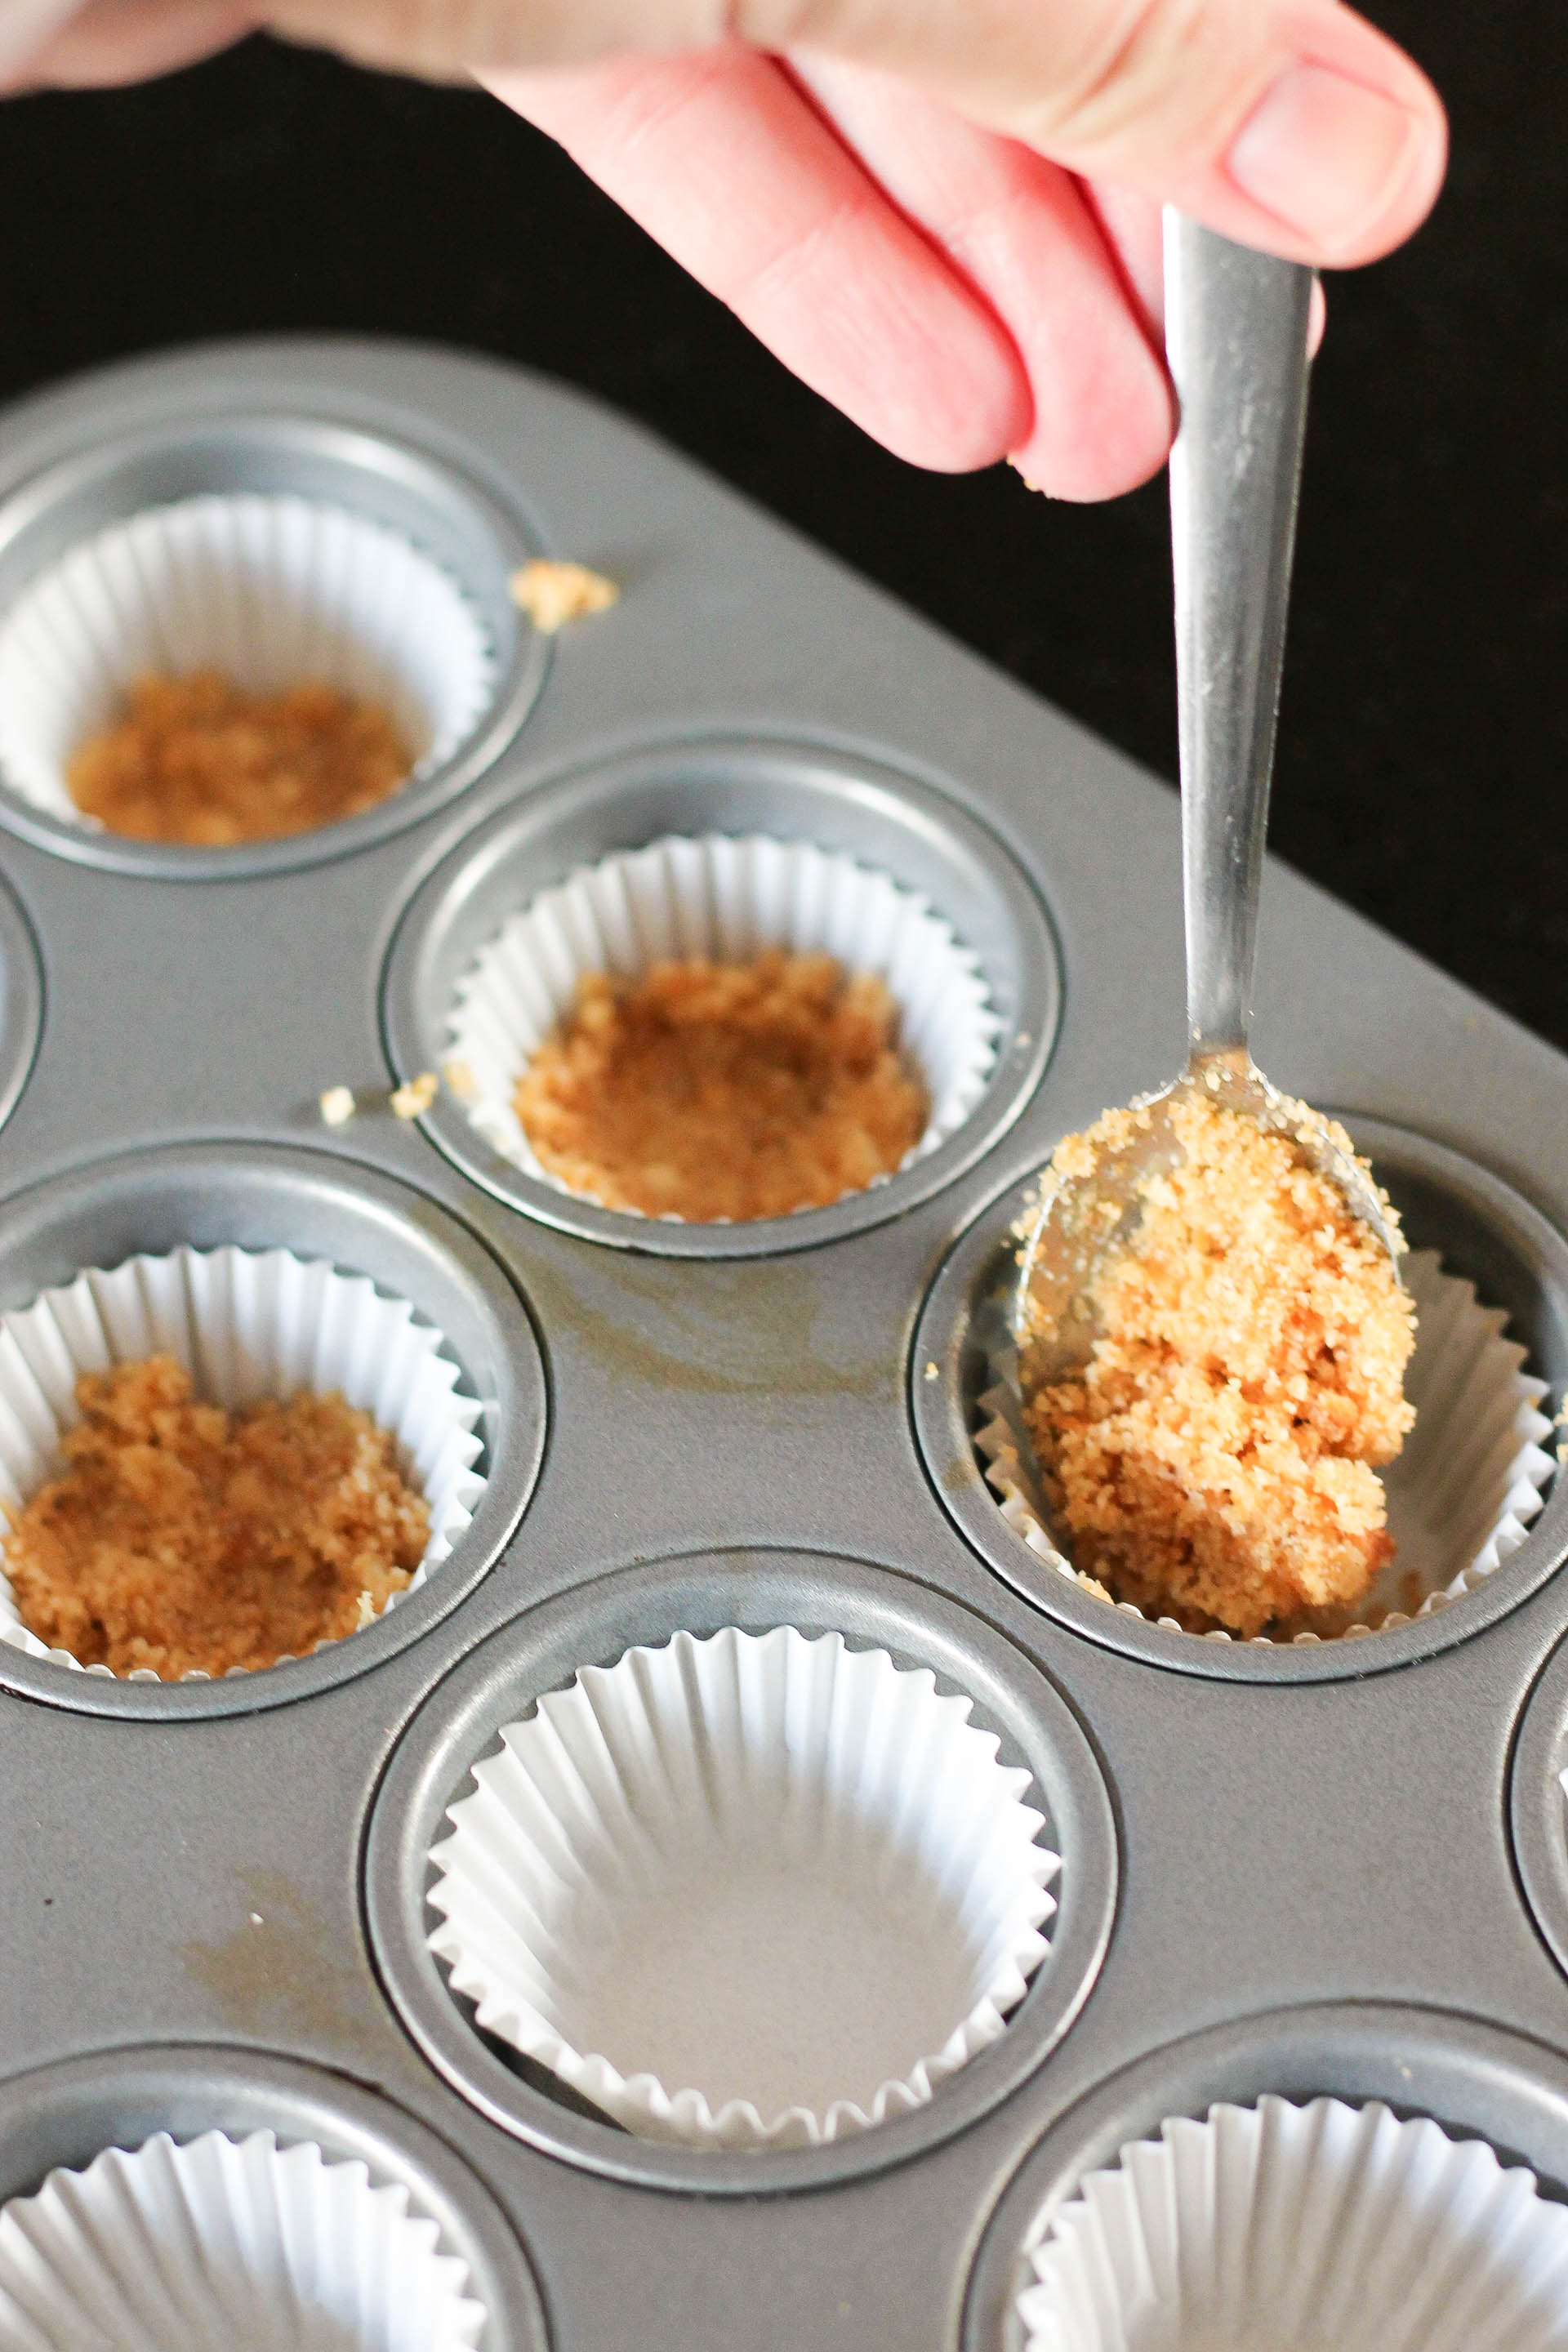 Vanilla Wafer Crust being spooned into mini muffin liners